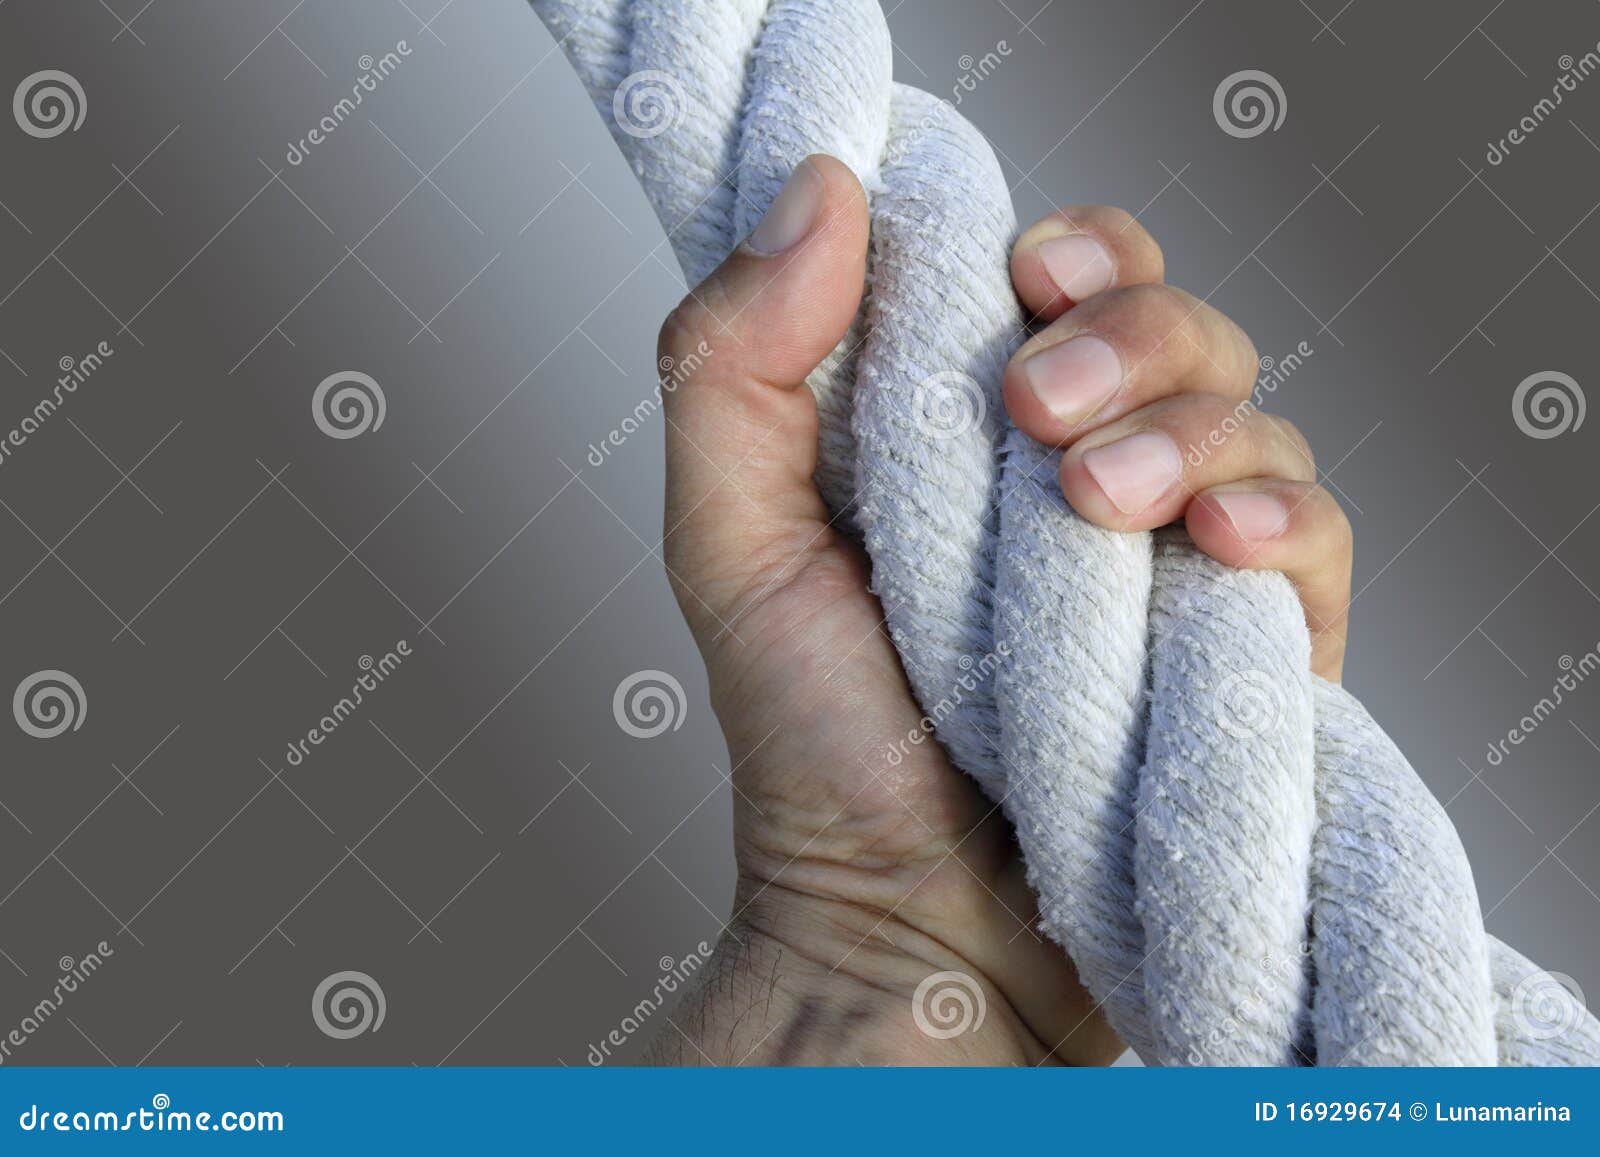 man hand grab grip strong big aged rope